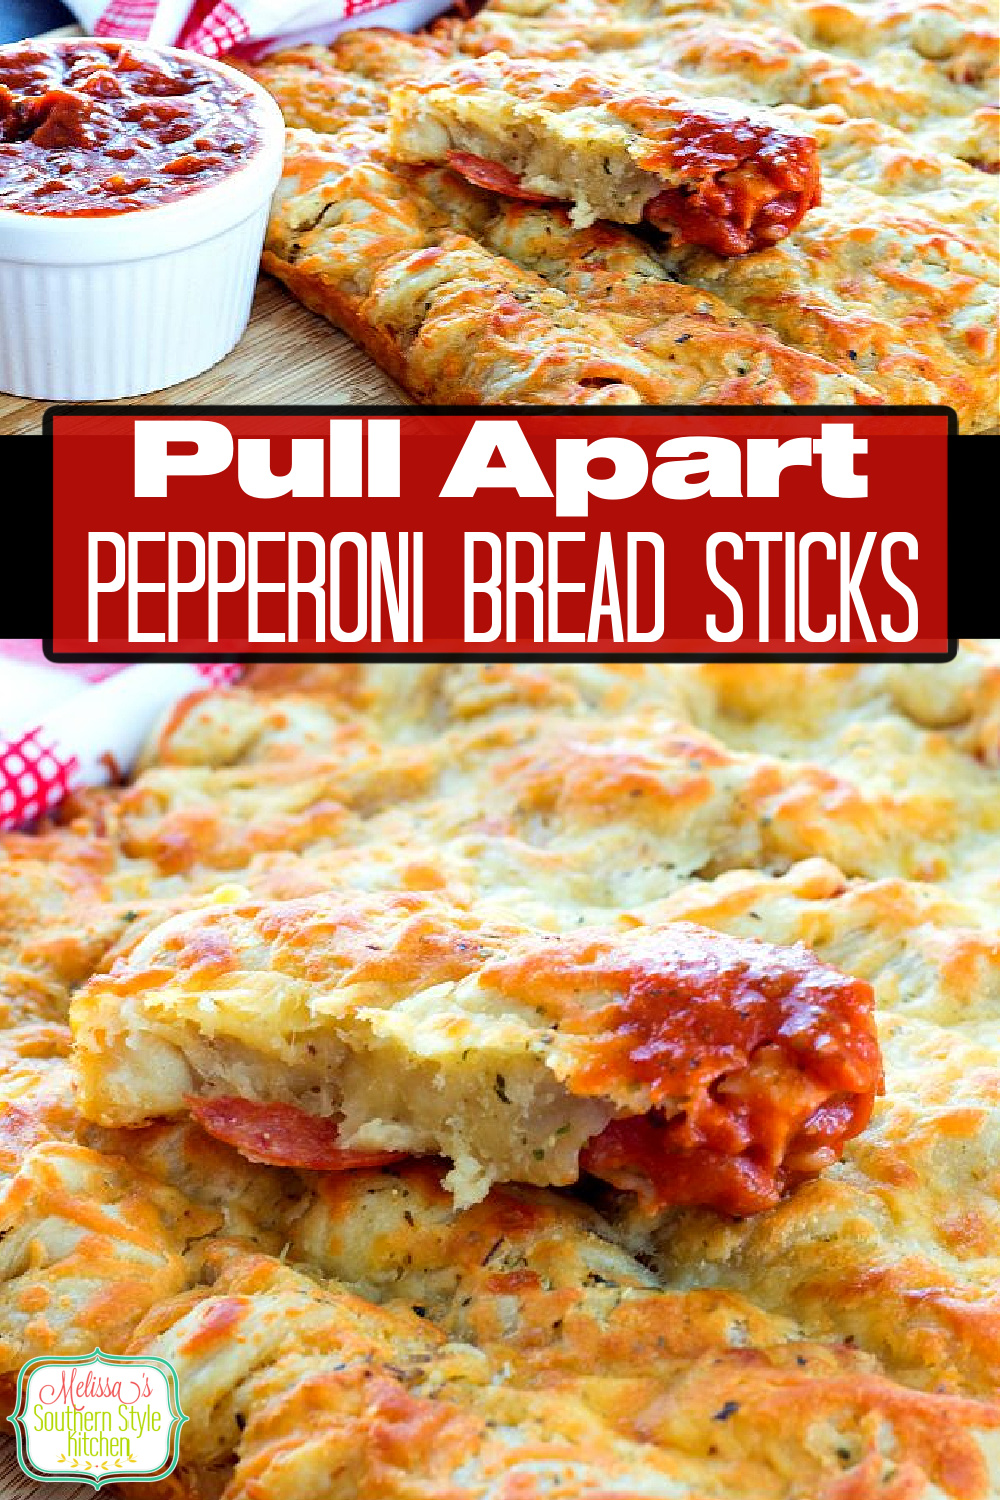 Serve these Pull Apart Pepperoni Bread Sticks as an appetizer or snack #pepperonibreadsticks #pullapartbread #pepperonibread #easybreadsticks #breadsticksrecipes #bread #breadrecipes #pepperoni #snacks #appetizers #southernfood #southernrecipes via @melissasssk